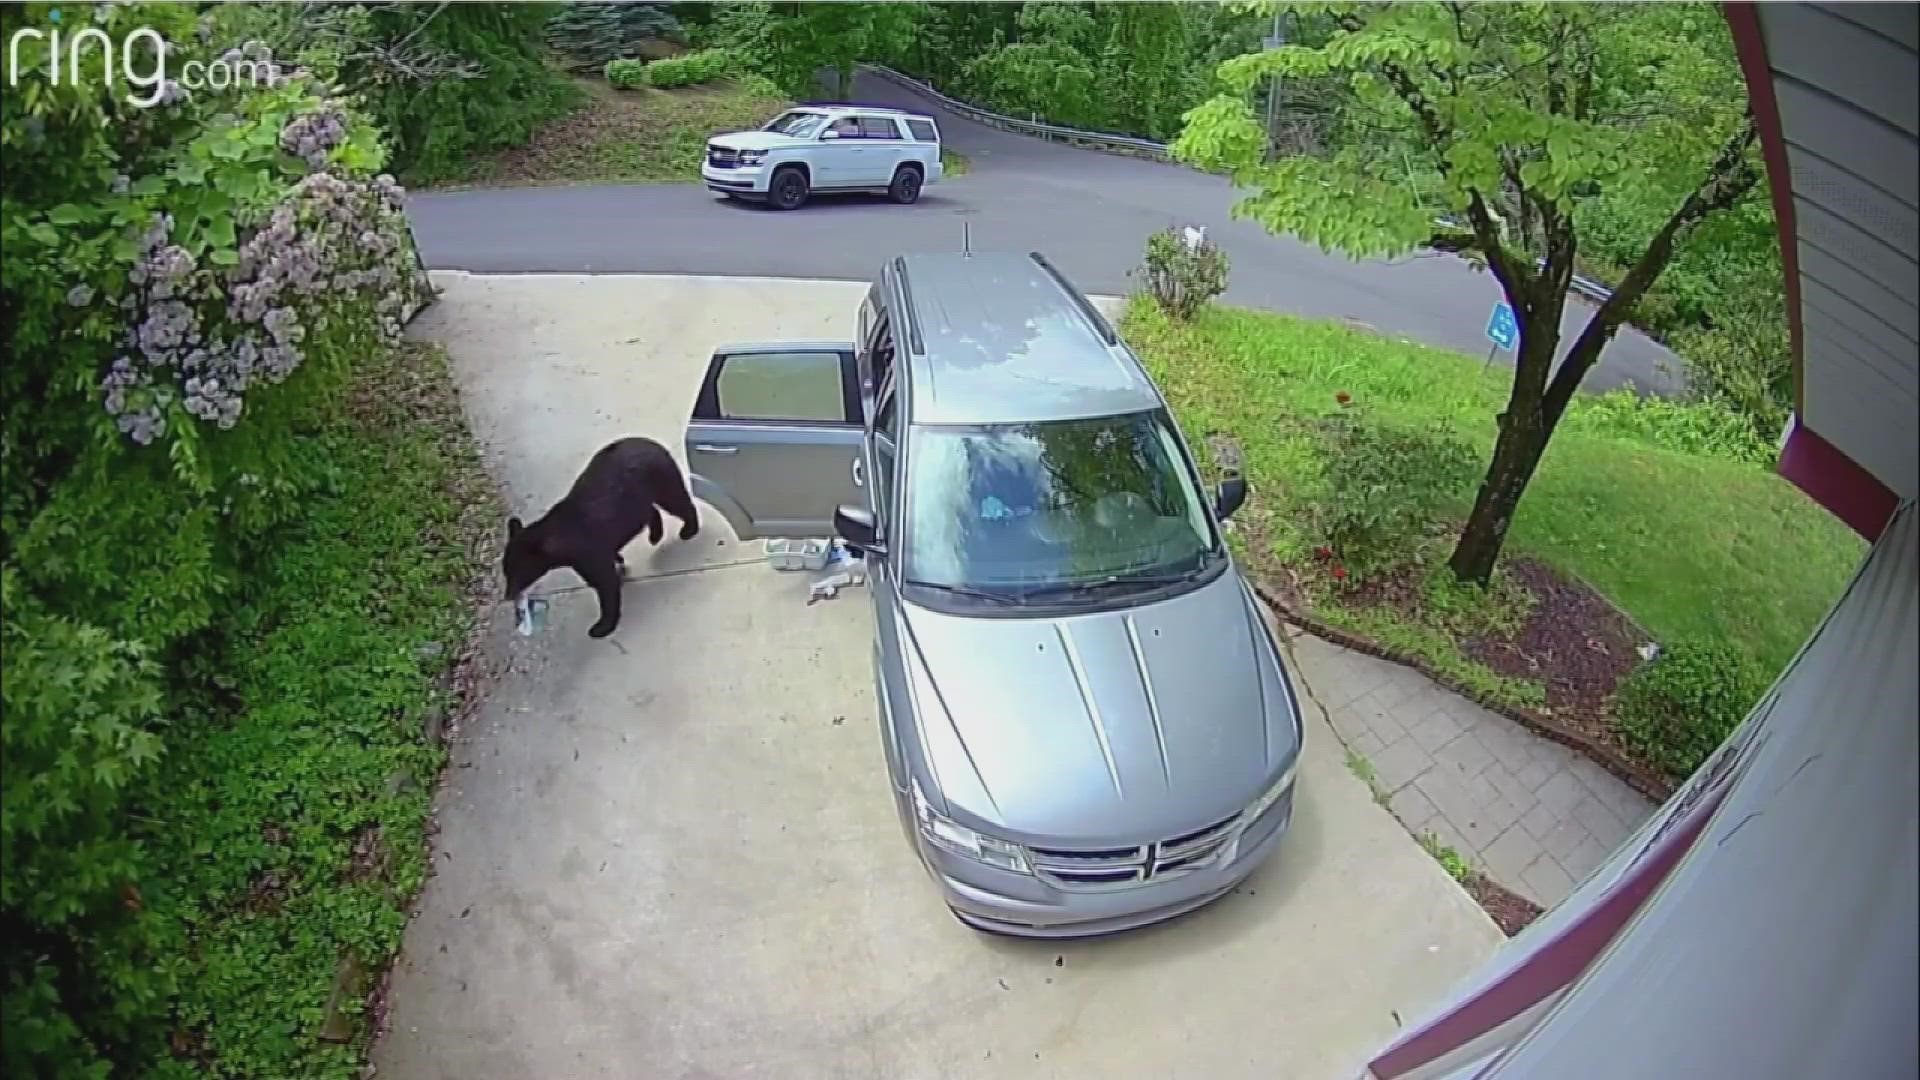 Ring will be showing off video of bears breaking into a vehicle taken from a Gatlinburg cabin in its commercial at this year's big game.